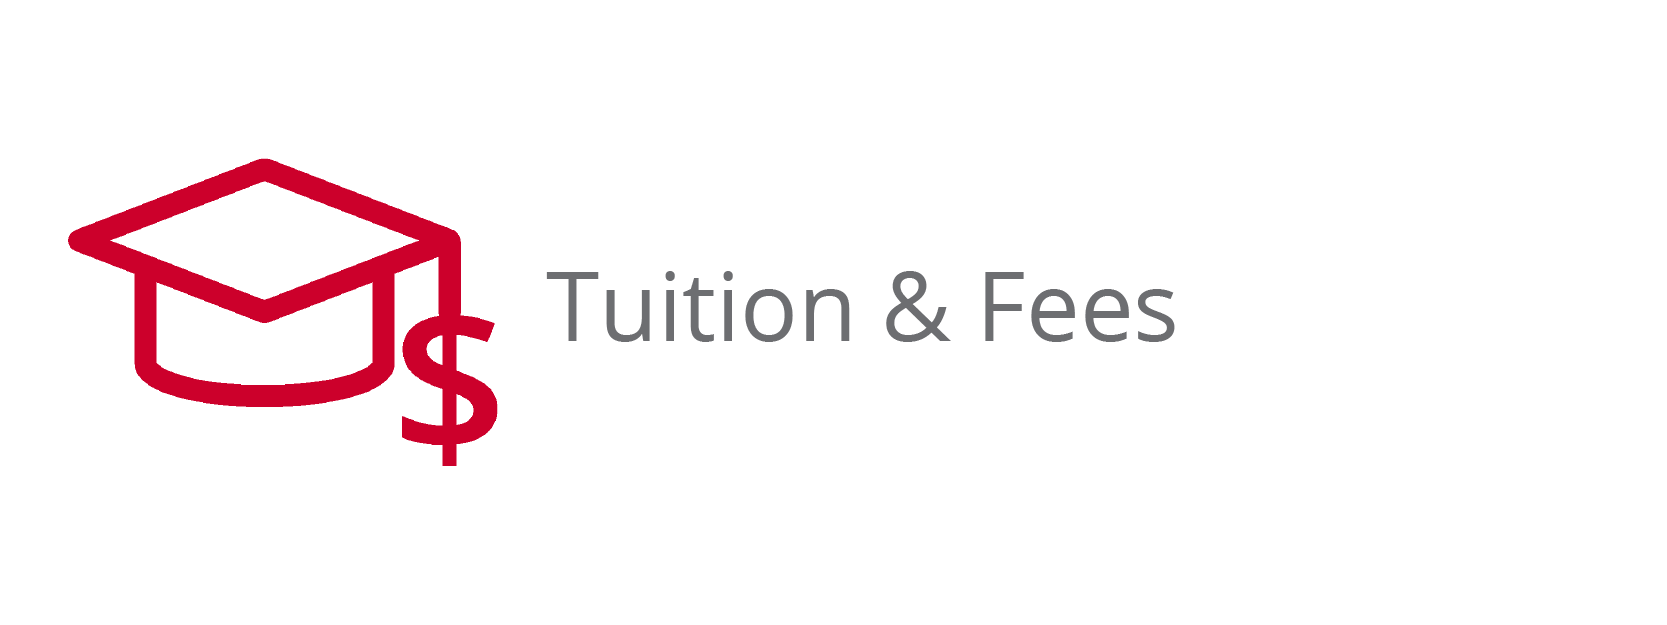 Tuition & Fees Button